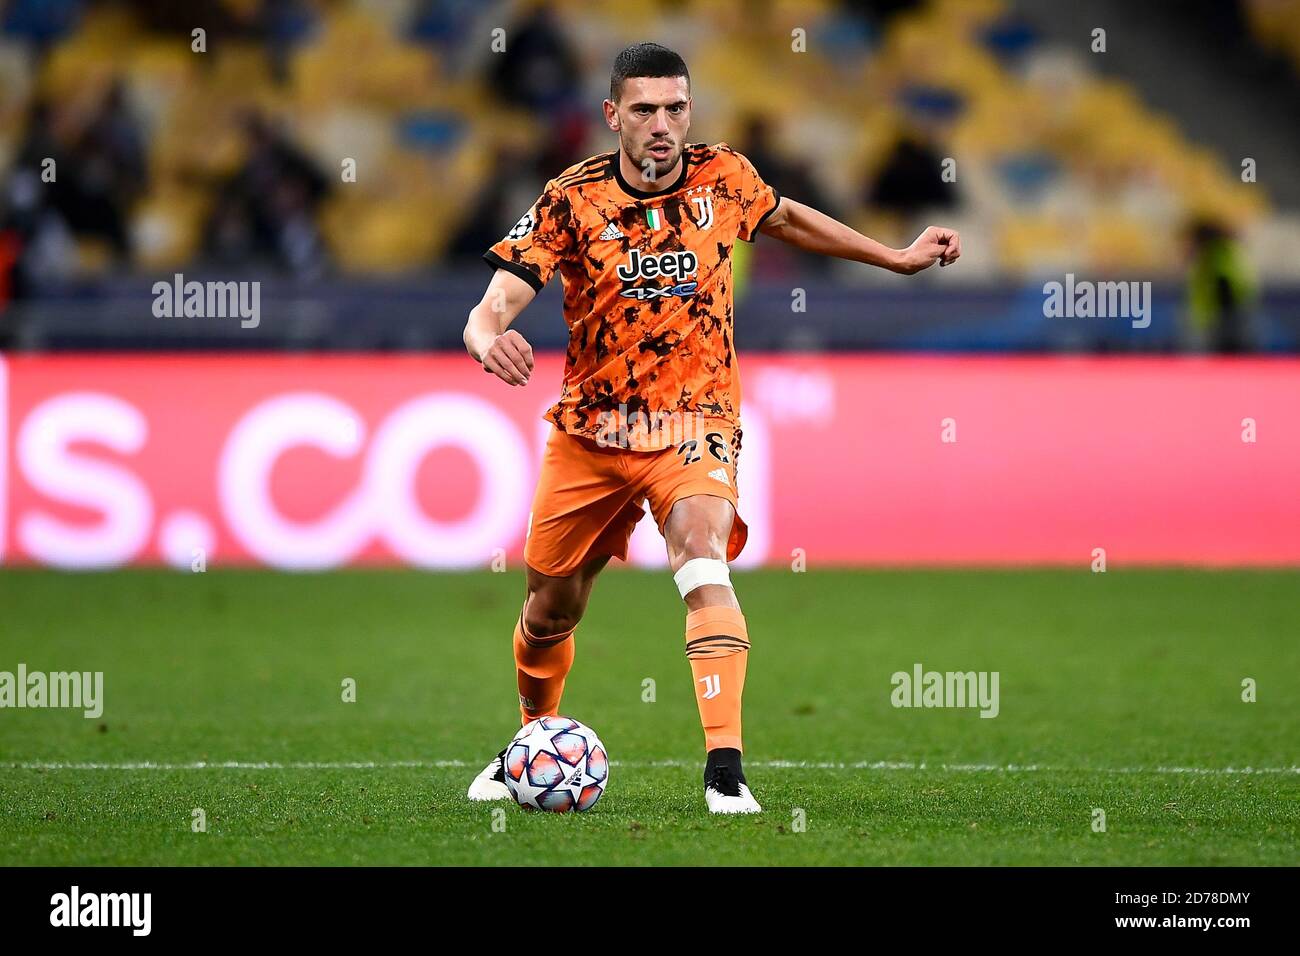 Kyiv, Ukraine - 20 October, 2020: Merih Demiral of Juventus FC in action  during the UEFA Champions League football match between FC Dynamo Kyiv and  Juventus FC. Juventus FC won 2-0 over